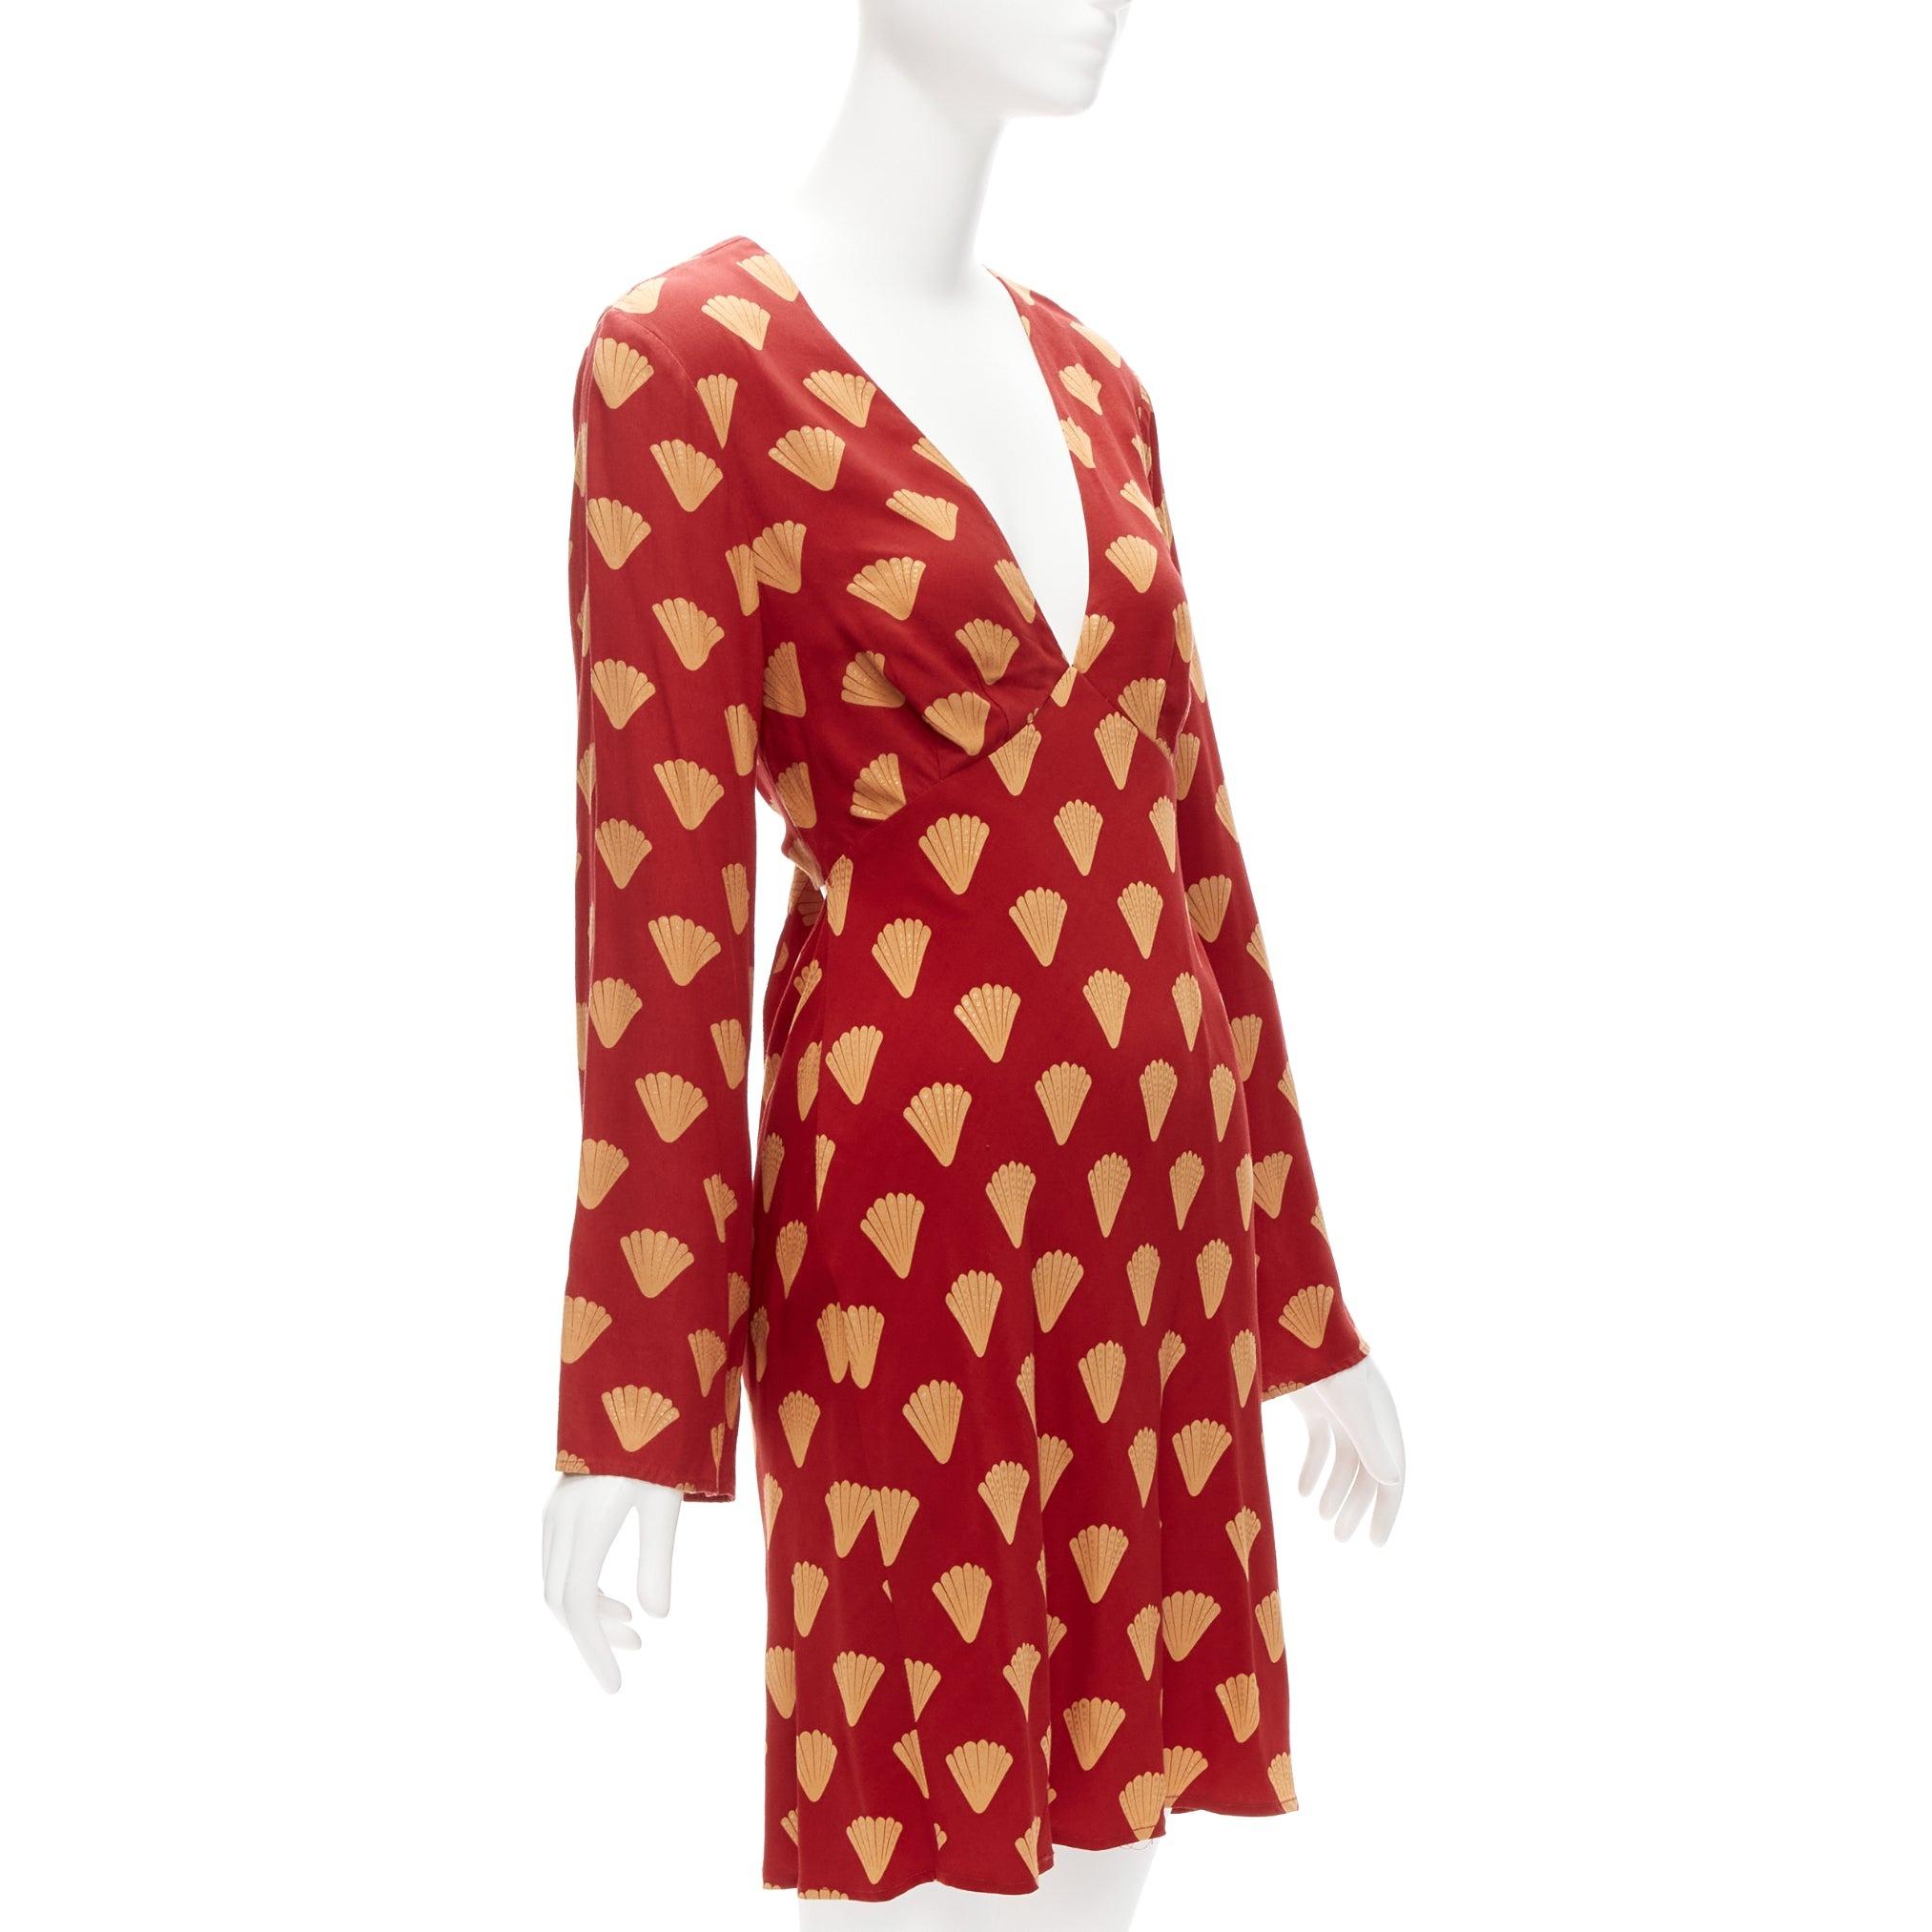 RIXO red gold oriental fan print V neck flare sleeves short dress S
Reference: JACG/A00131
Brand: Rixo
Material: Viscose
Color: Red, Gold
Pattern: Oriental
Closure: Self Tie
Extra Details: Discreet metallic texture on each fan.
Made in: